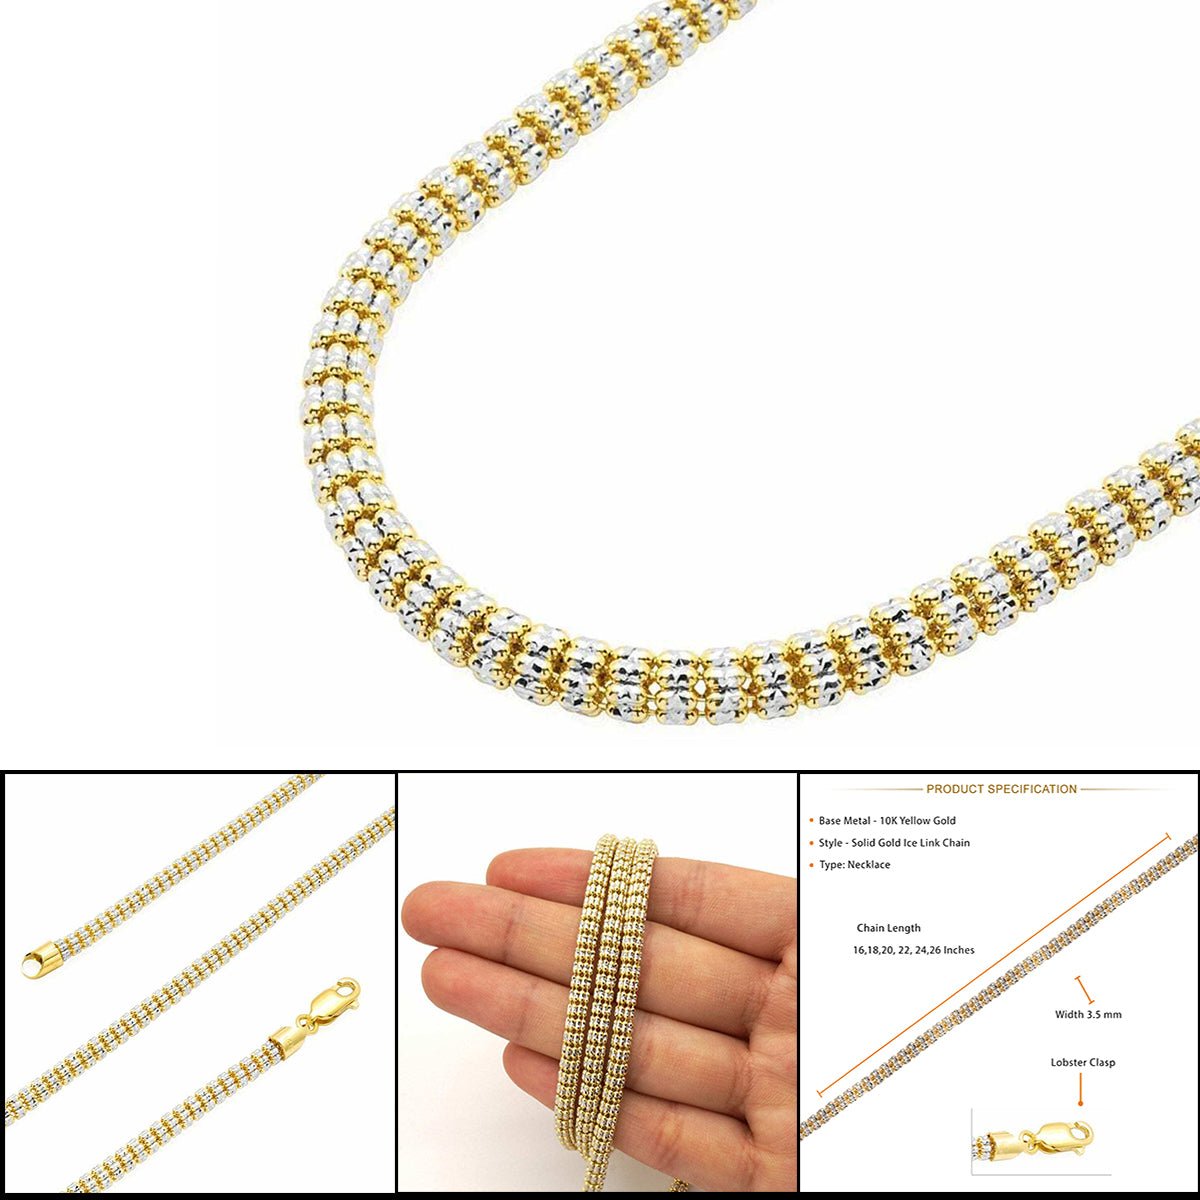 10K SOLID GOLD ICE LINK CHAIN